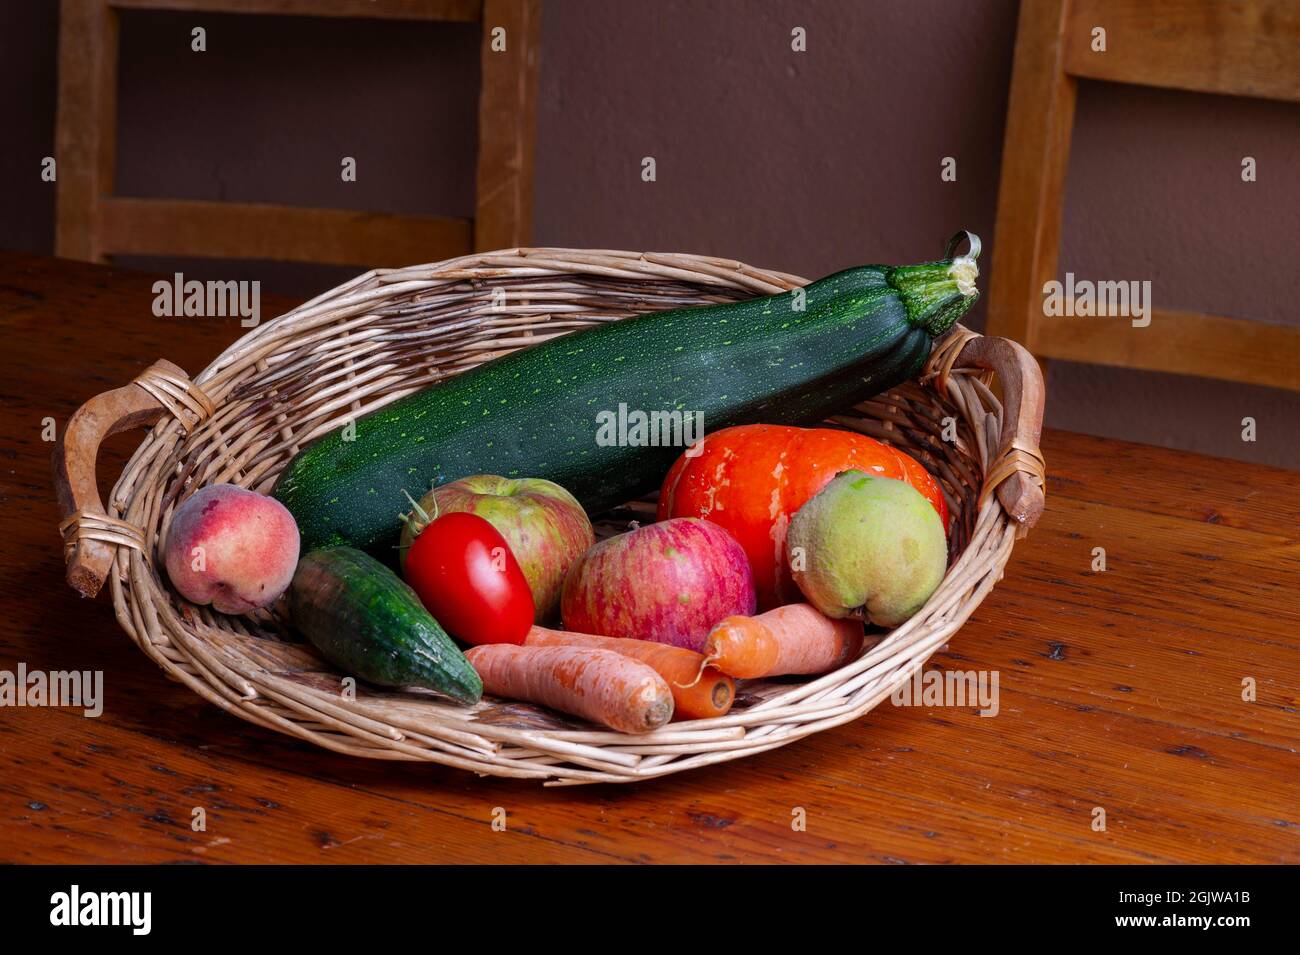 Summer fruits and vegetables, Alsace, France. A composition of end of summer products presented in a wicker basket on a table. Stock Photo